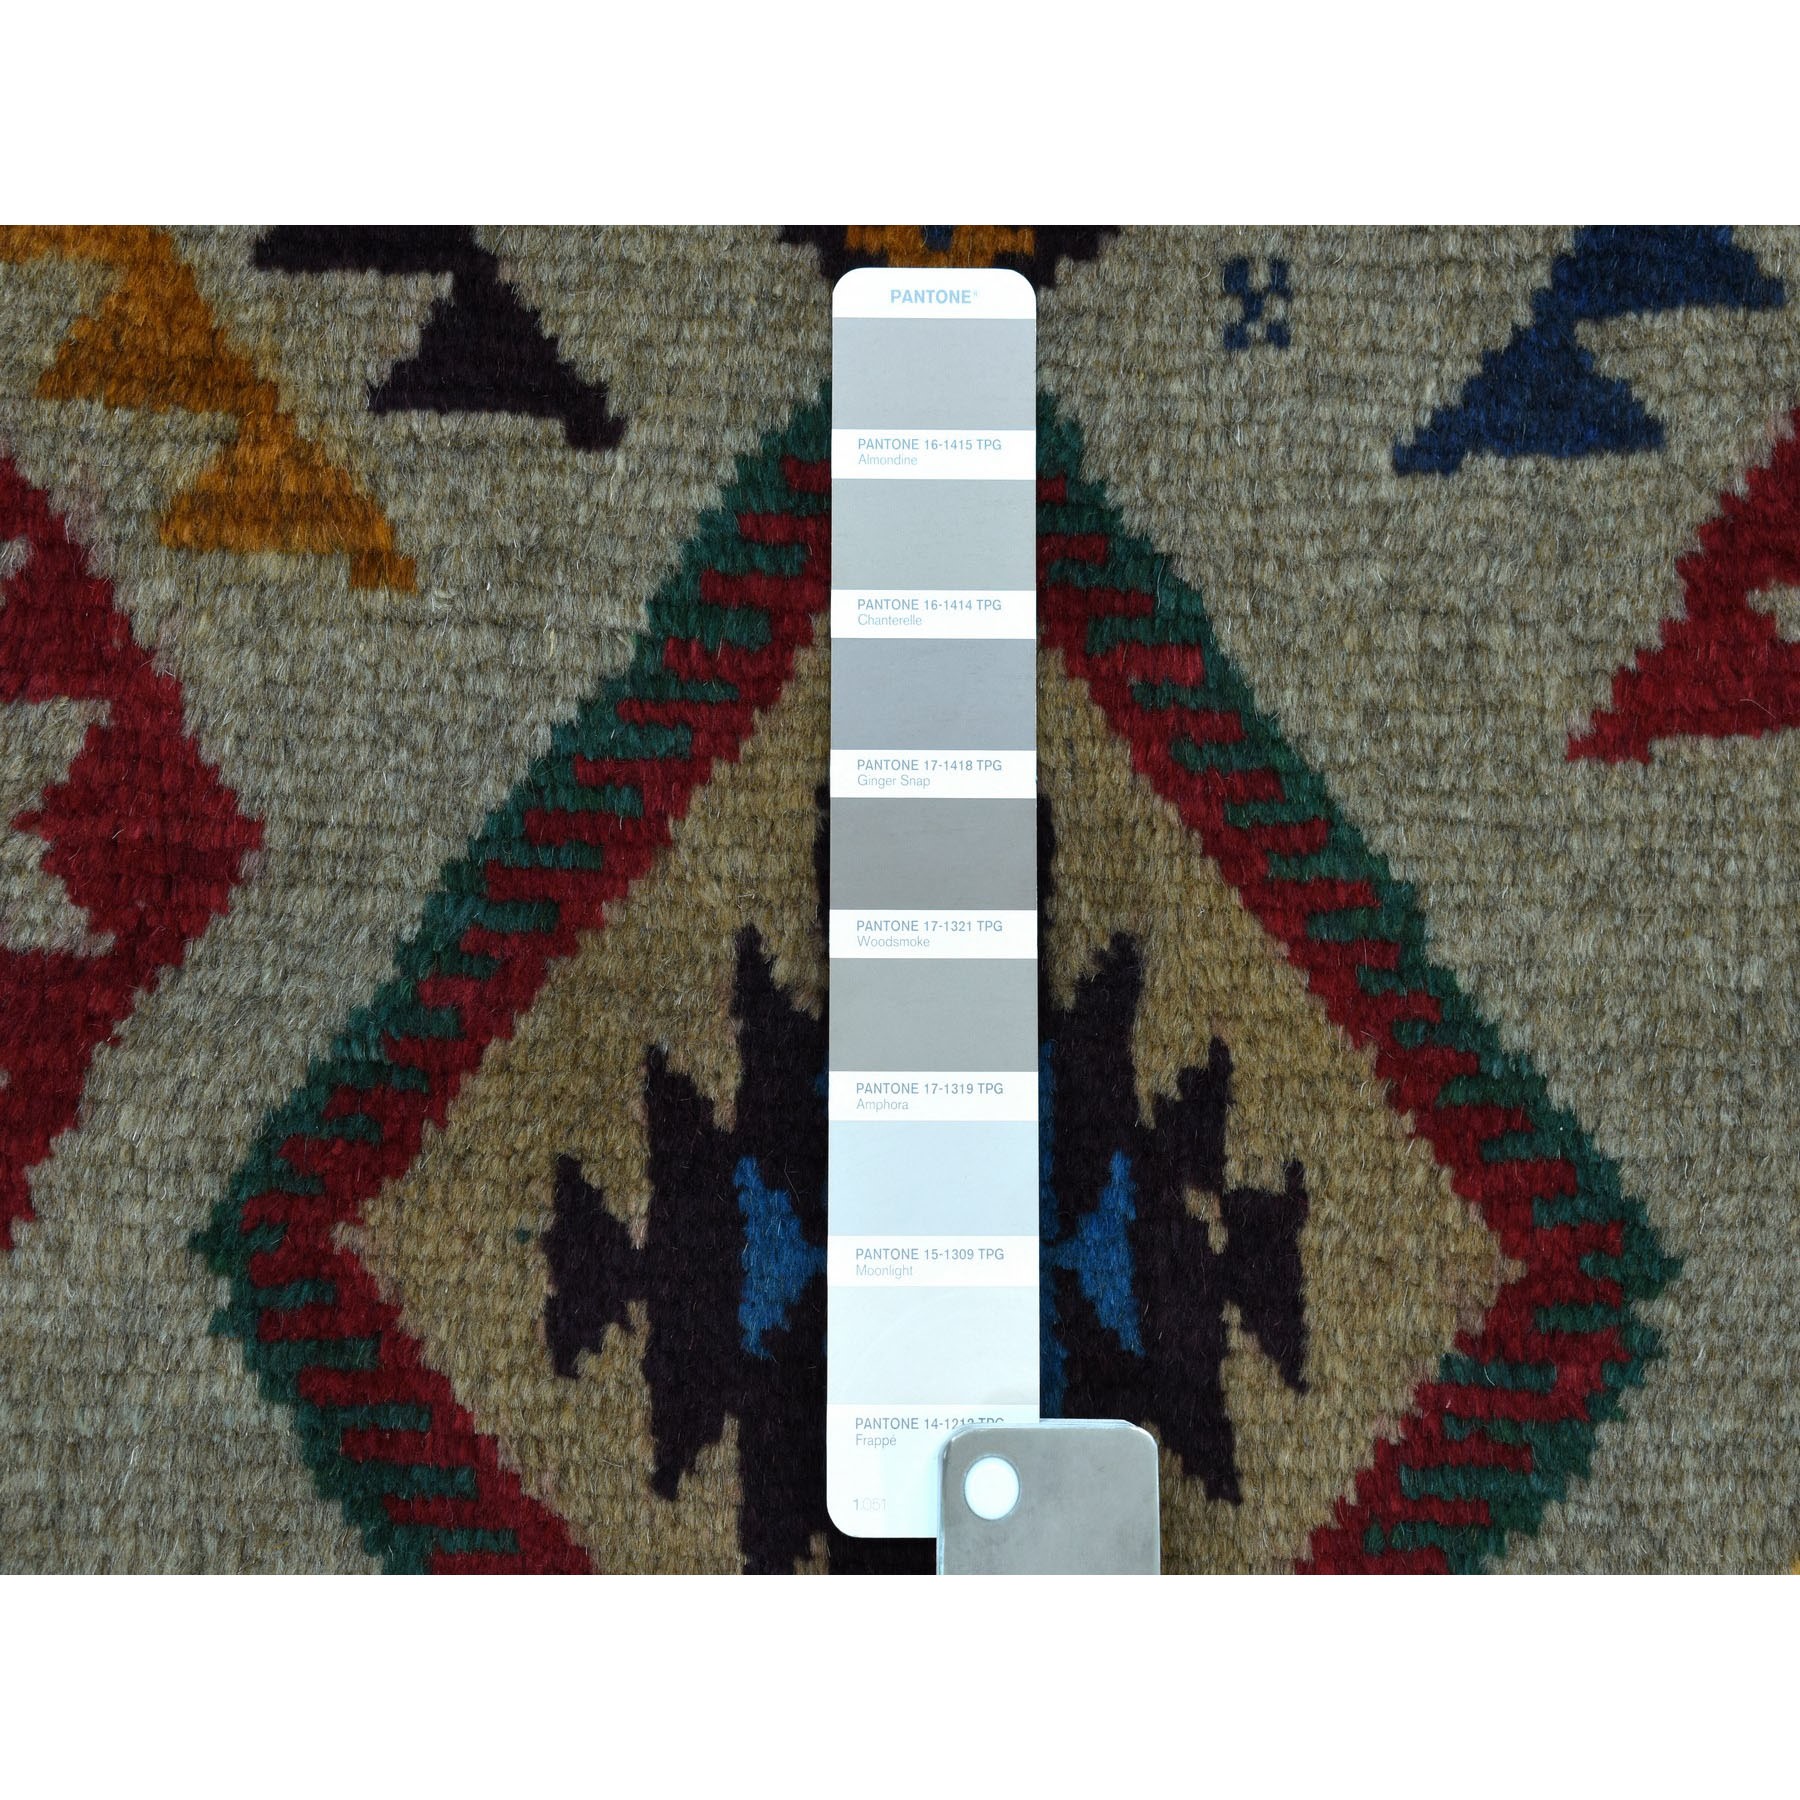 5'8"x7'6" Gray Tribal Design Colorful Afghan Baluch 100% Wool Hand Woven Oriental Rug 